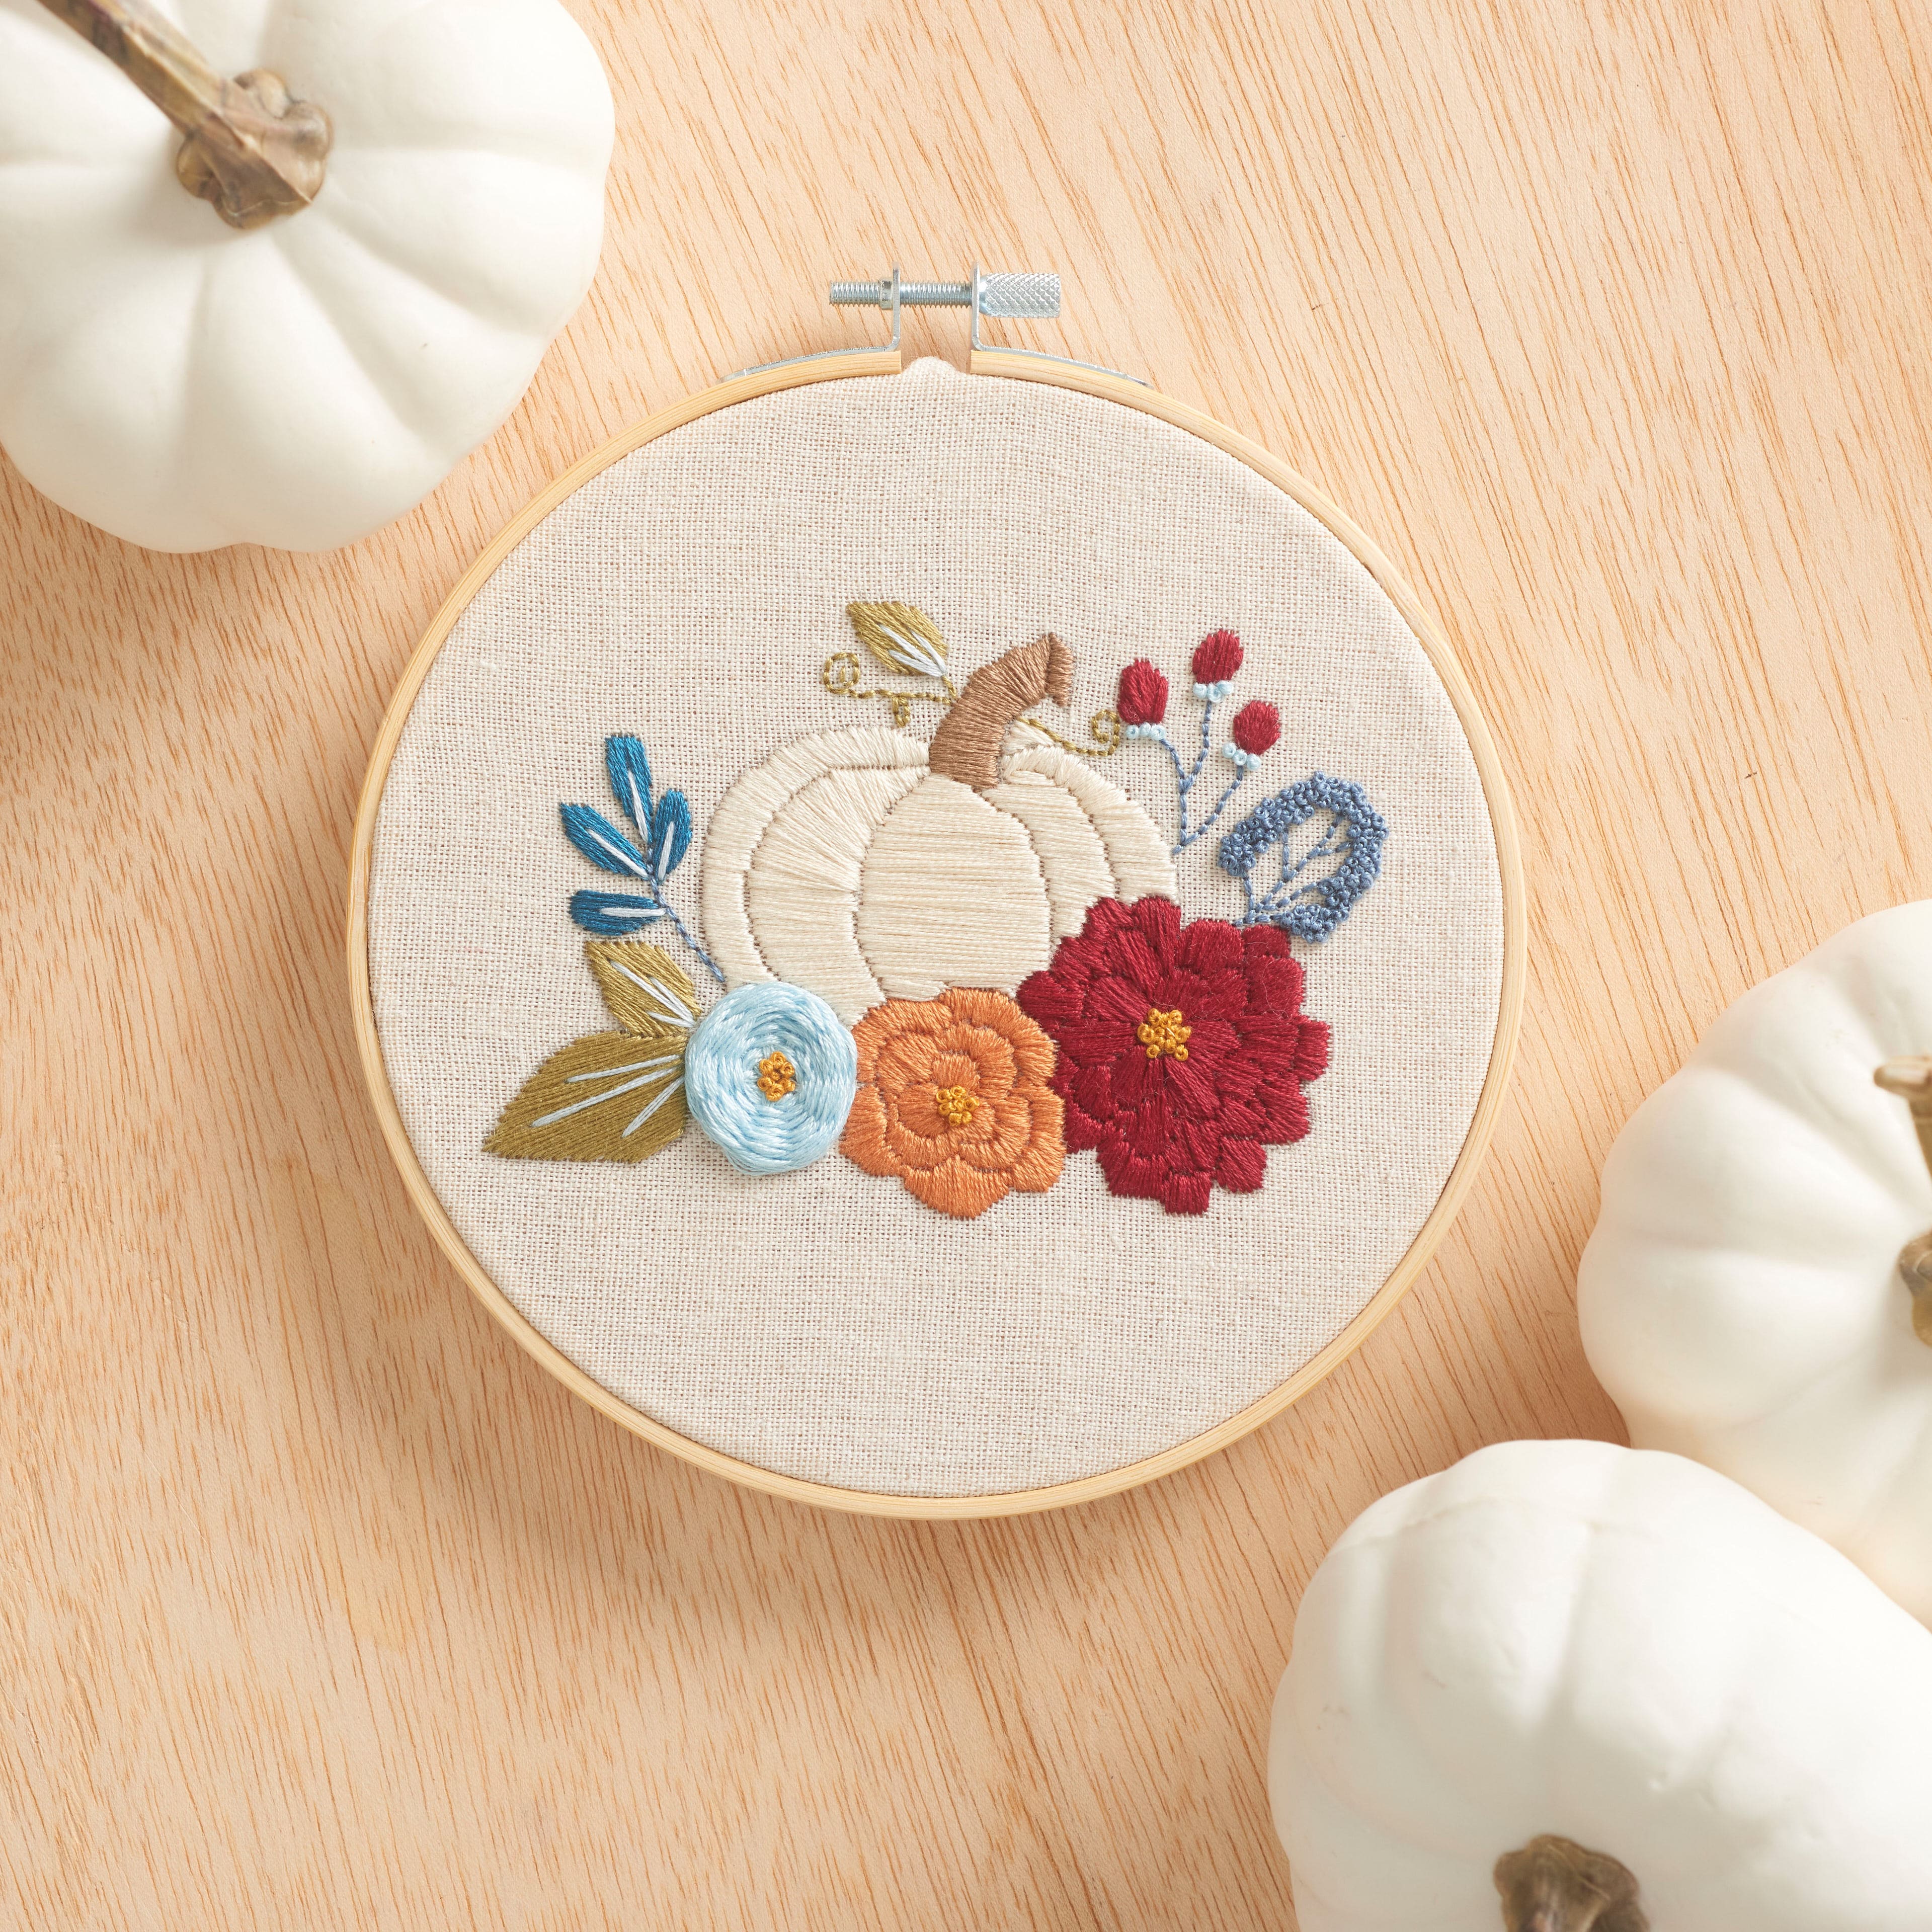 6 Pumpkin & Floral Stamped Design Embroidery Kit by Loops